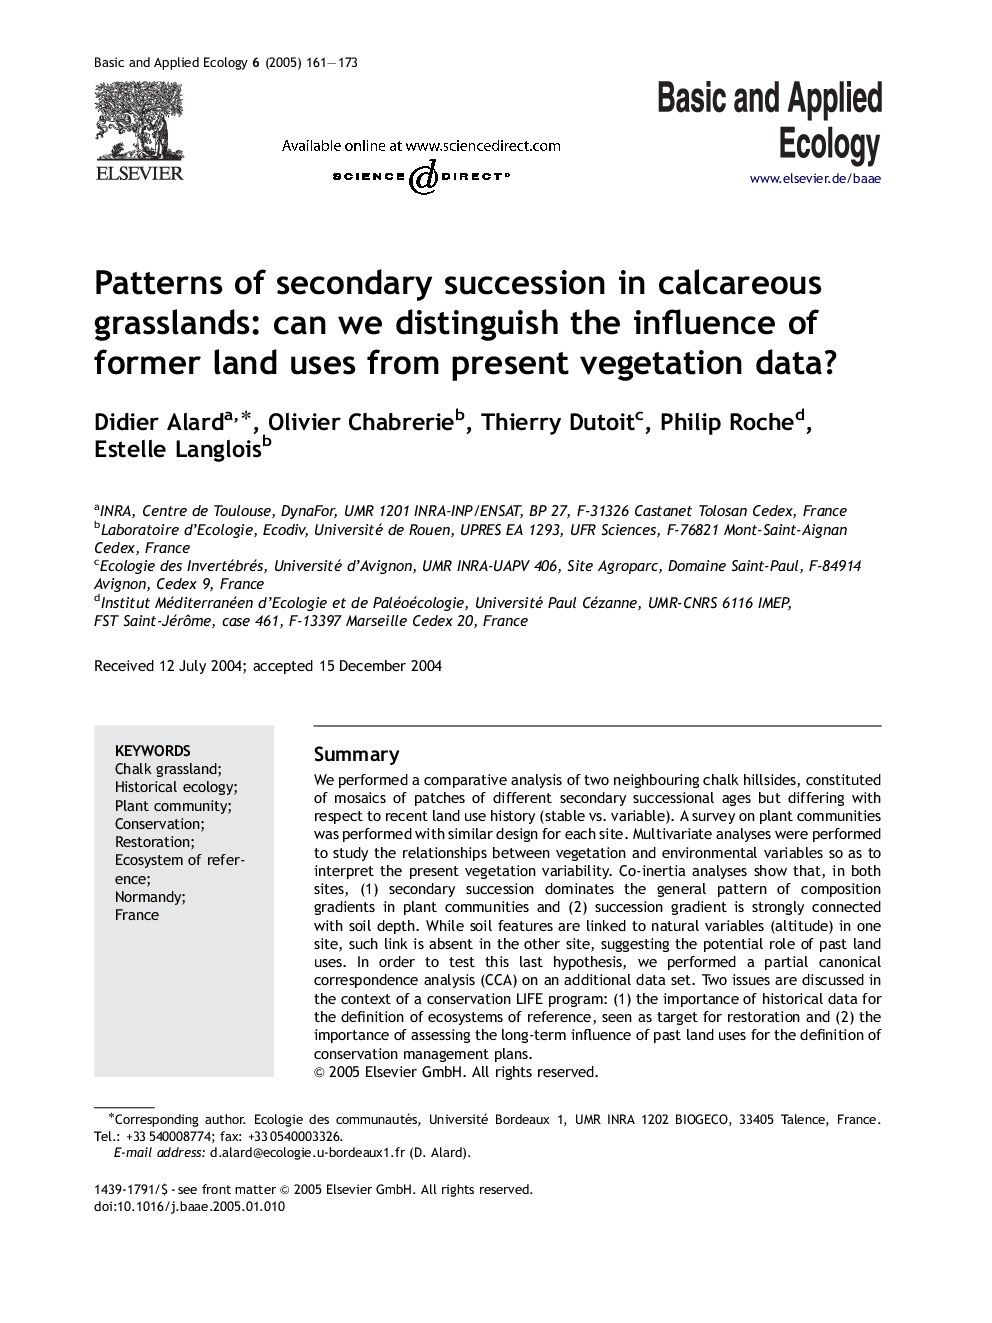 Patterns of secondary succession in calcareous grasslands: can we distinguish the influence of former land uses from present vegetation data?